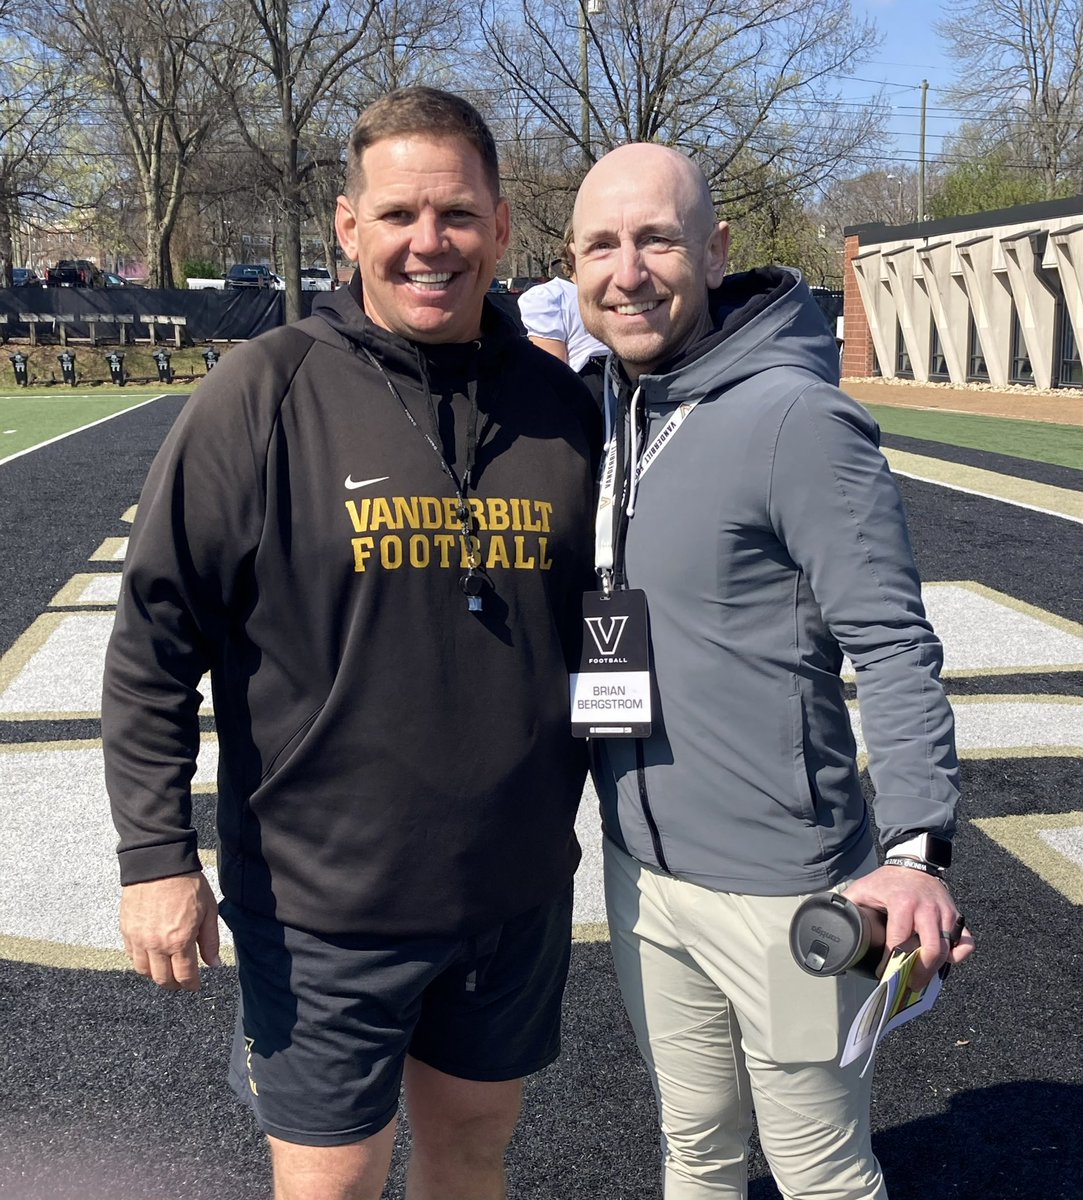 @WinonaStateATH Nation:  Great to get @Coach_Bergy to Nashville with his family last week for some @VandyFootball!  #WarriorFamily #ComeHomeWithIt 💯🟣⚪️⚔️⚫️🟡⚓️